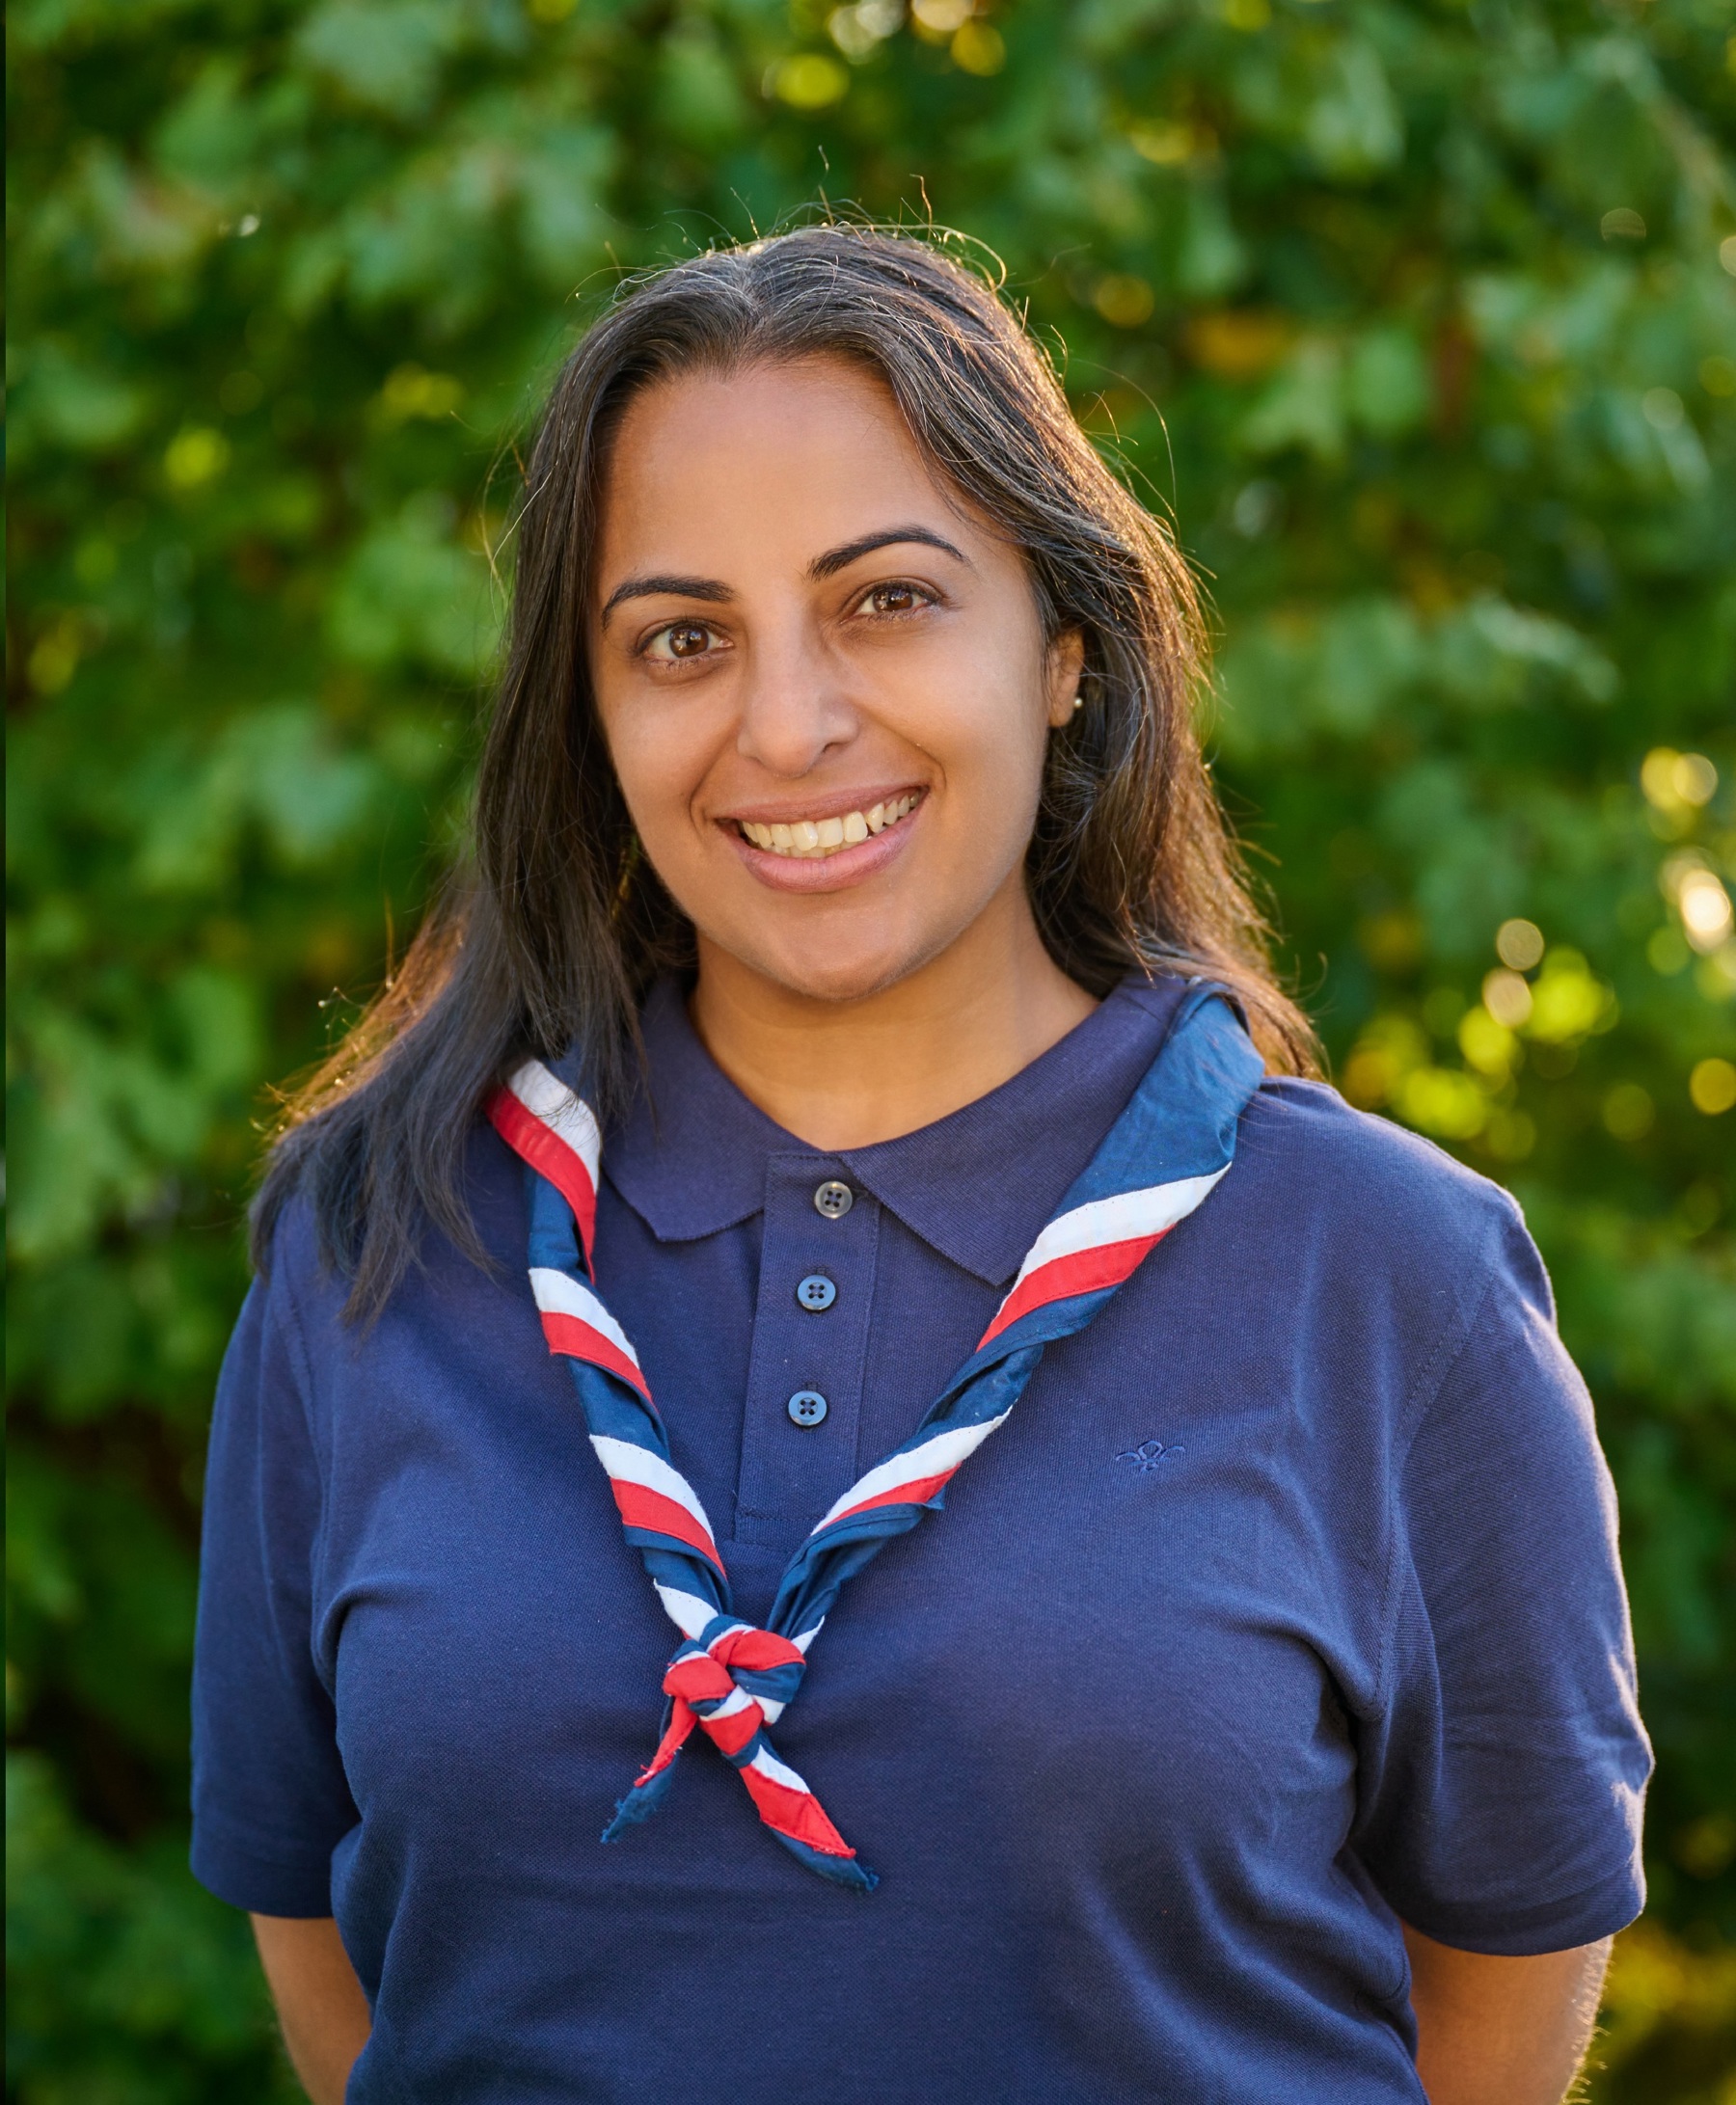 Nisha Patel, UK Commissioner for Perception, in a blue, white and red necker at Gilwell Park